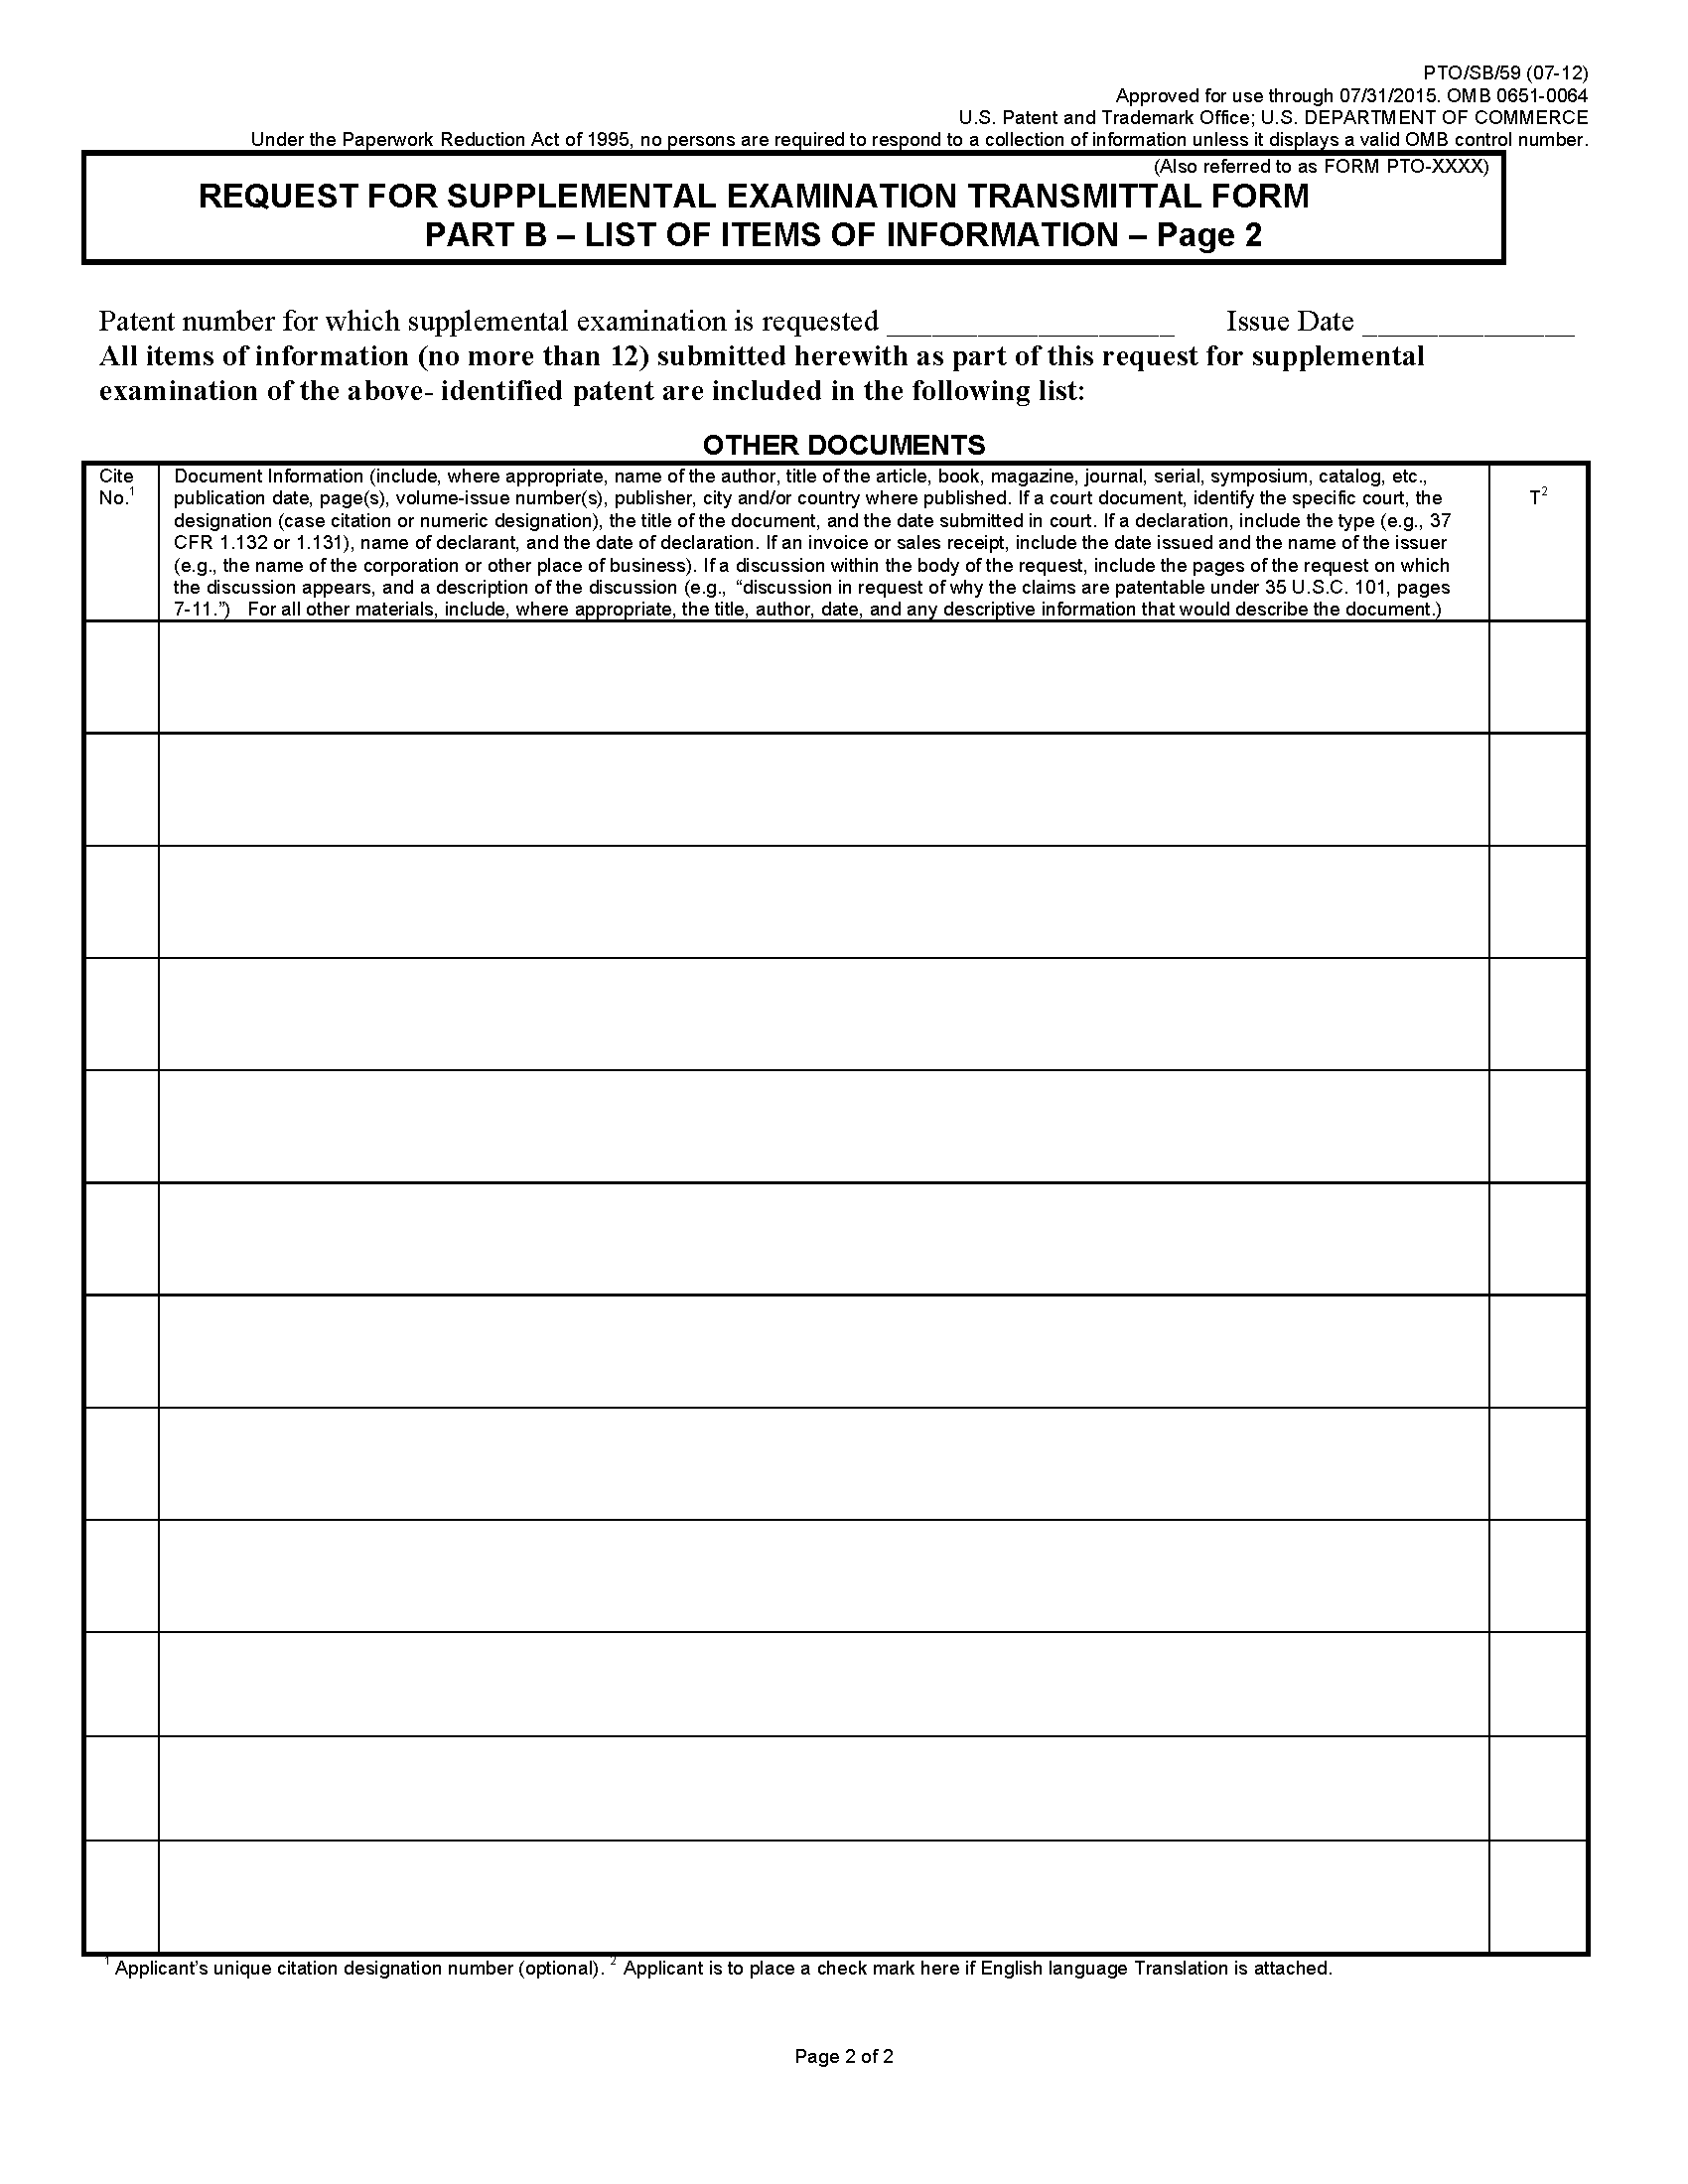 Form PTO/SB/59. Page 2 of 2. Request for Supplemantal Examination Transmittal Form - Part B. List of Items of Information.